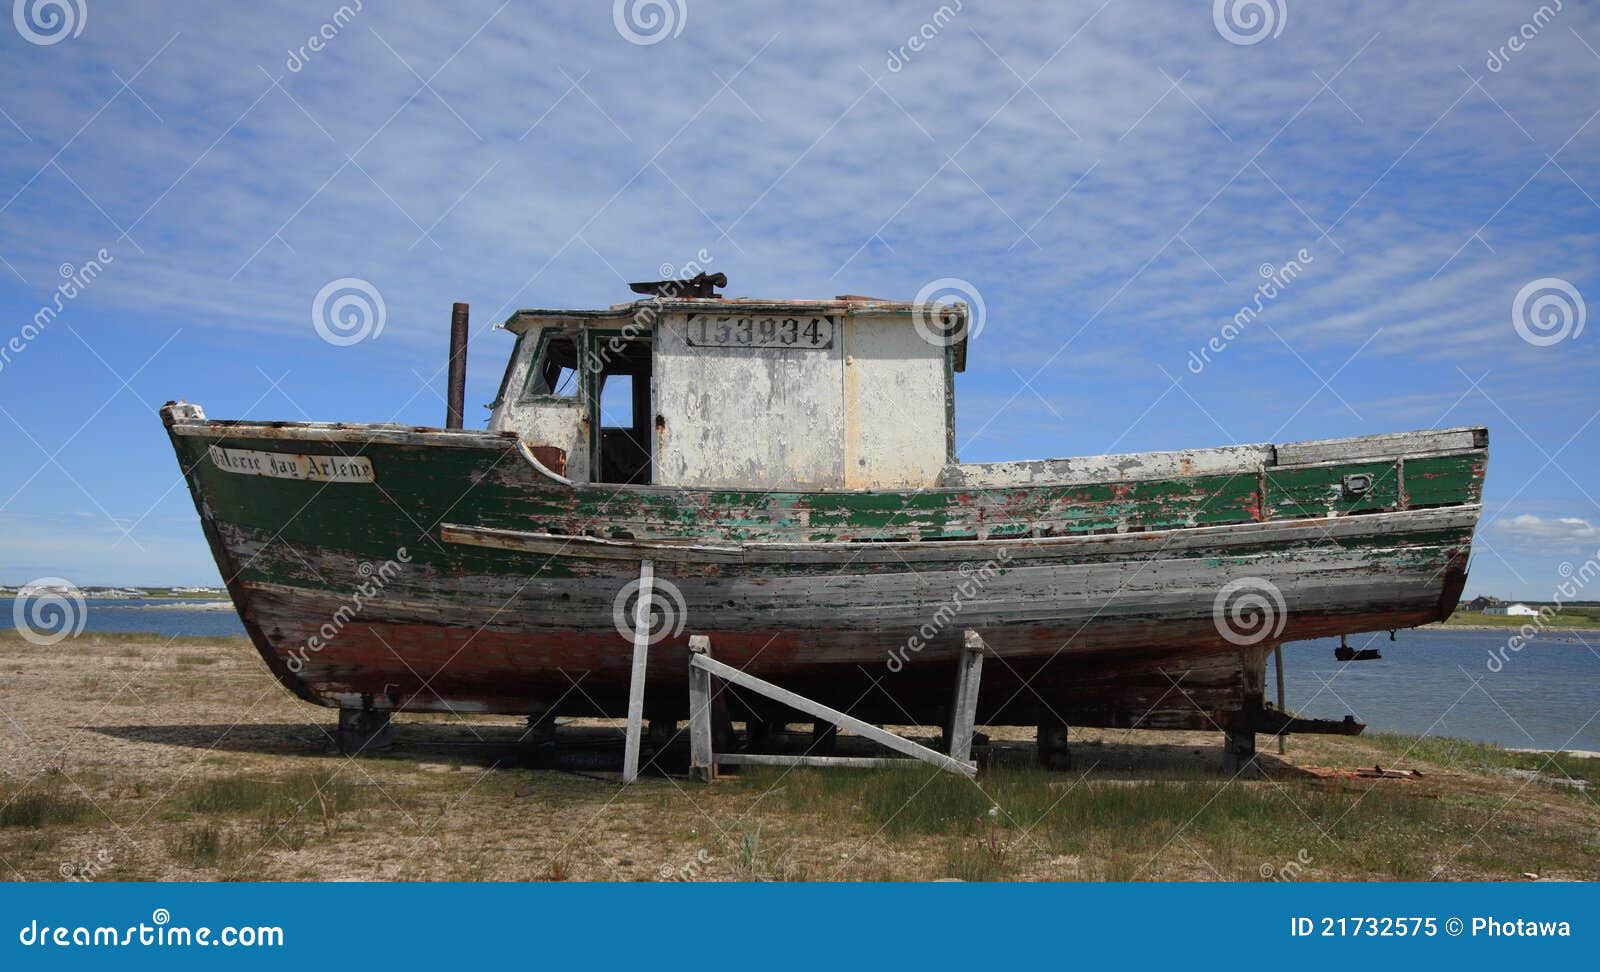 FLOWER’S COVE, CANADA – JULY 23: A fishing boat sits abandoned on 